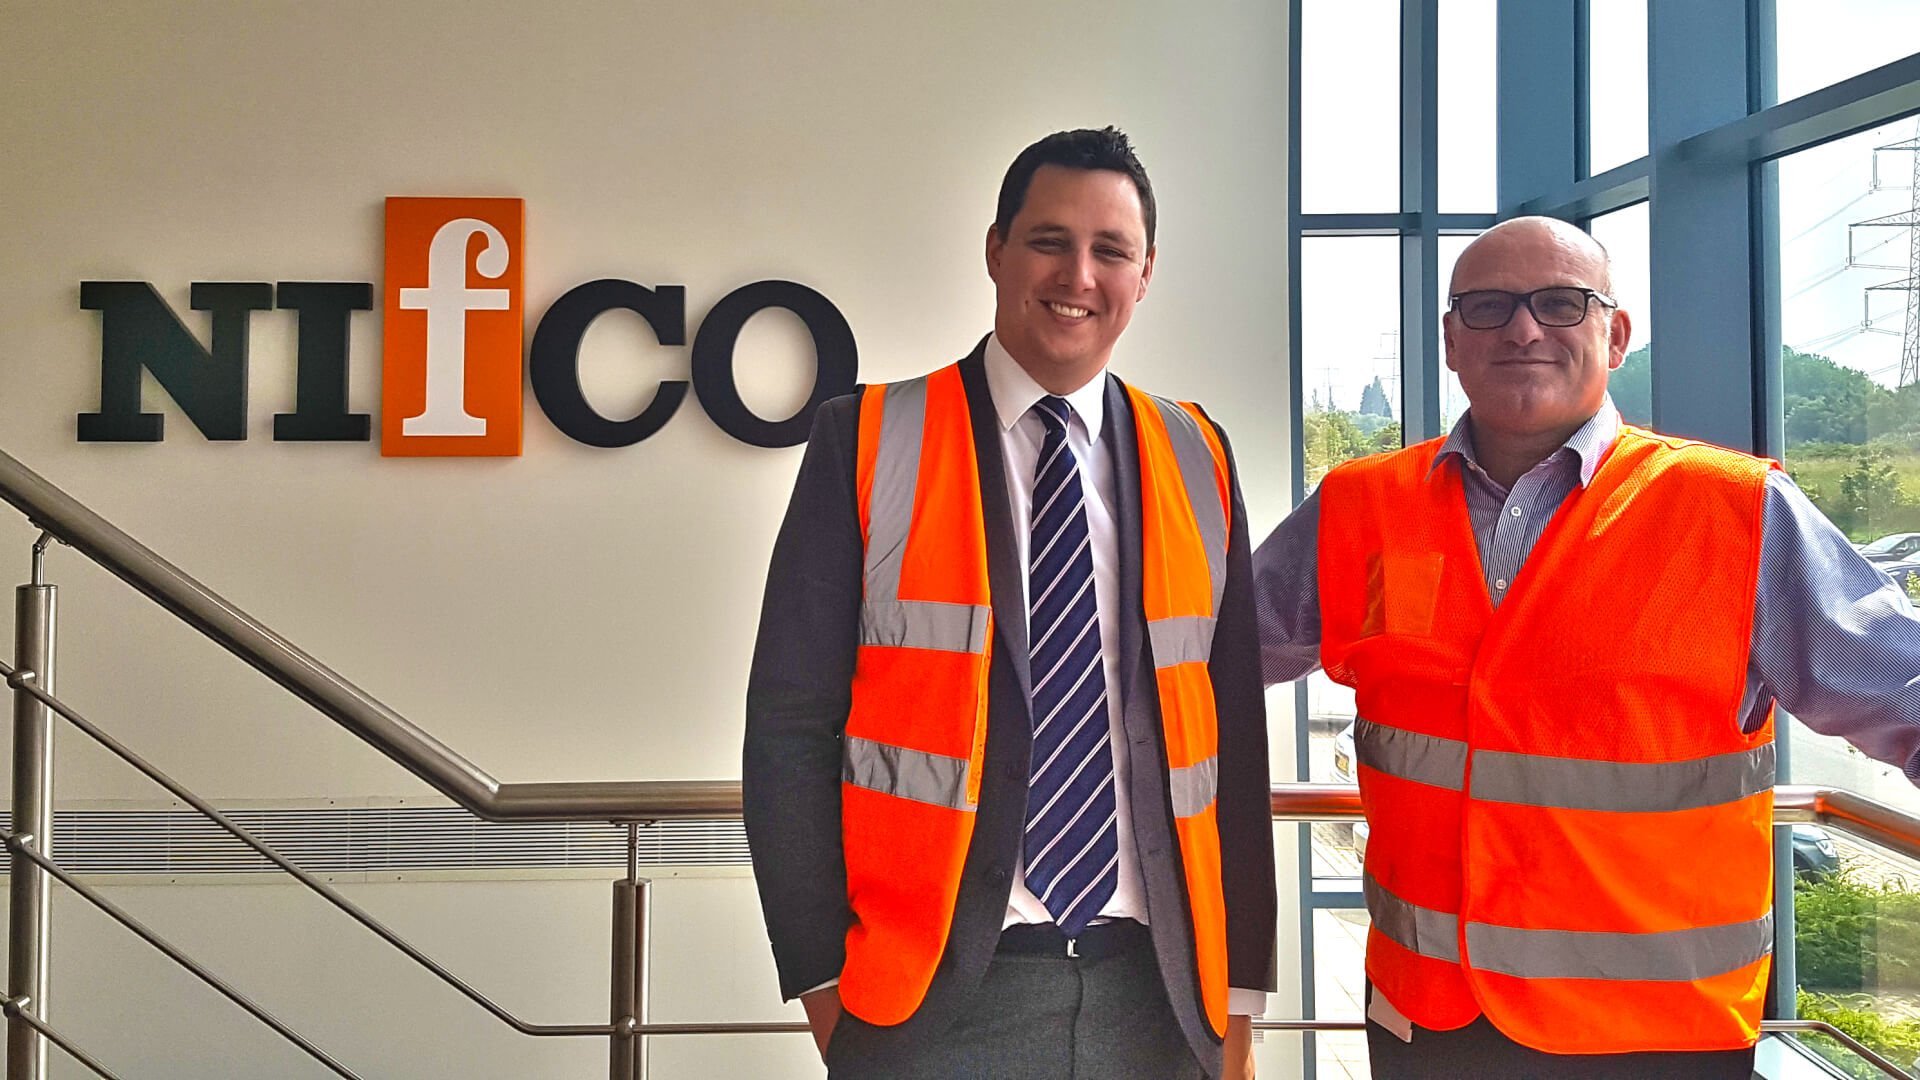 Tees Valley Mayor Visits Nifco | Tees Valley Combined Authority